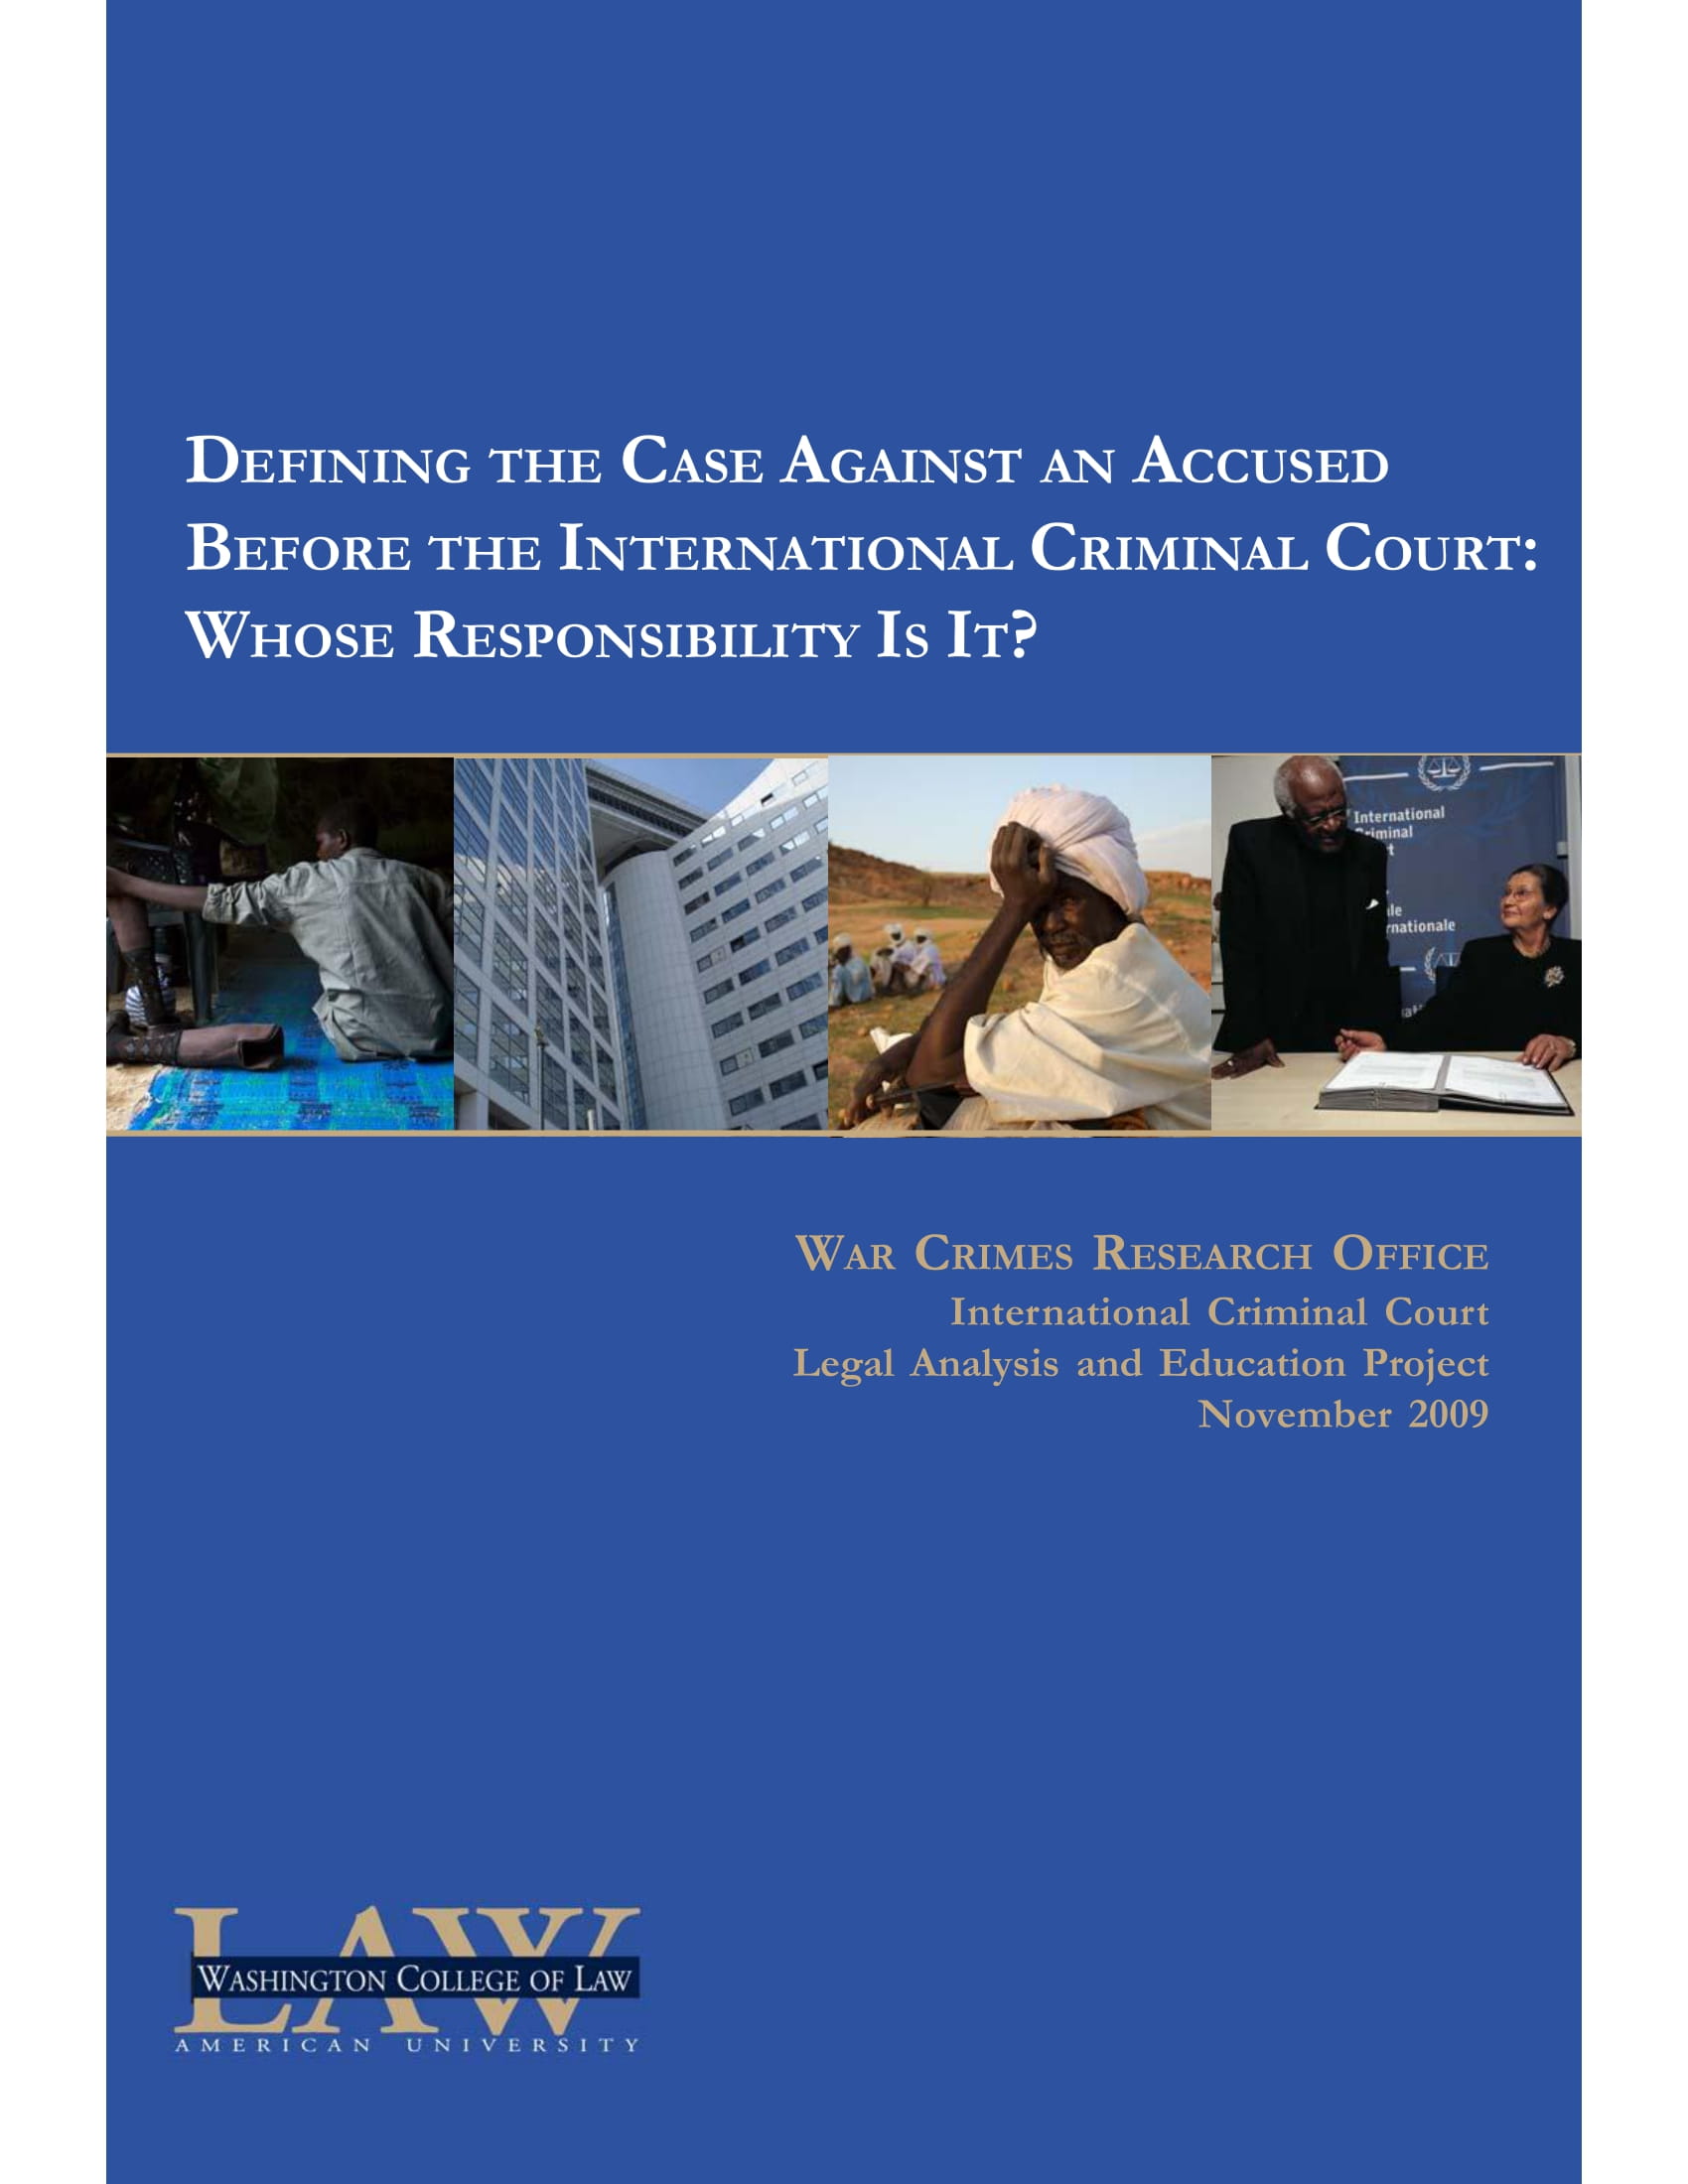 Report 10: Defining the Case Against an Accused Before the ICC: Whose Responsibility Is It?